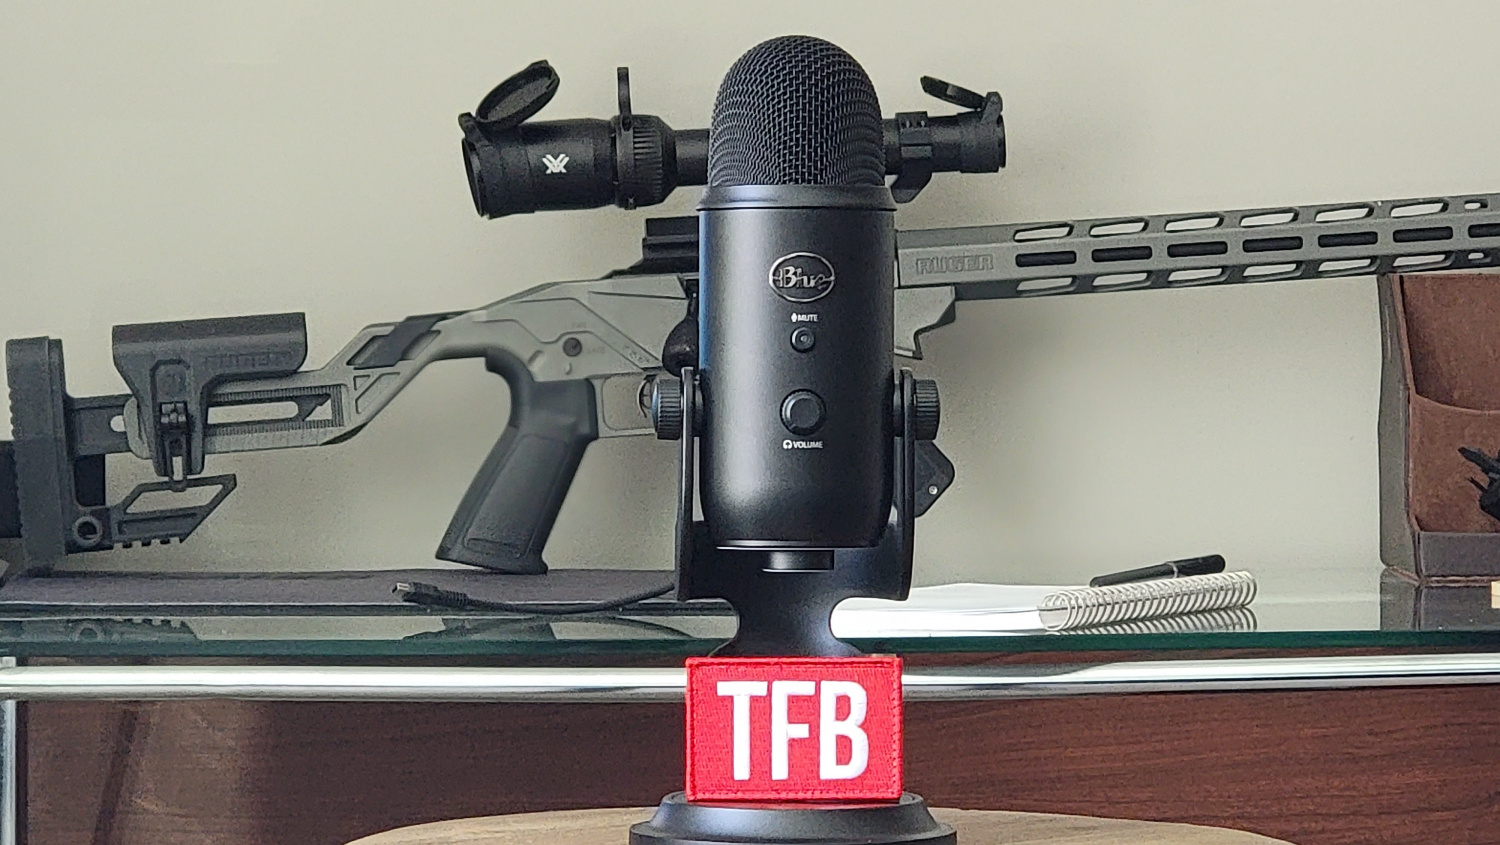 TFB Podcast Roundup 80: More Podcasts for The Office Chair Jockey